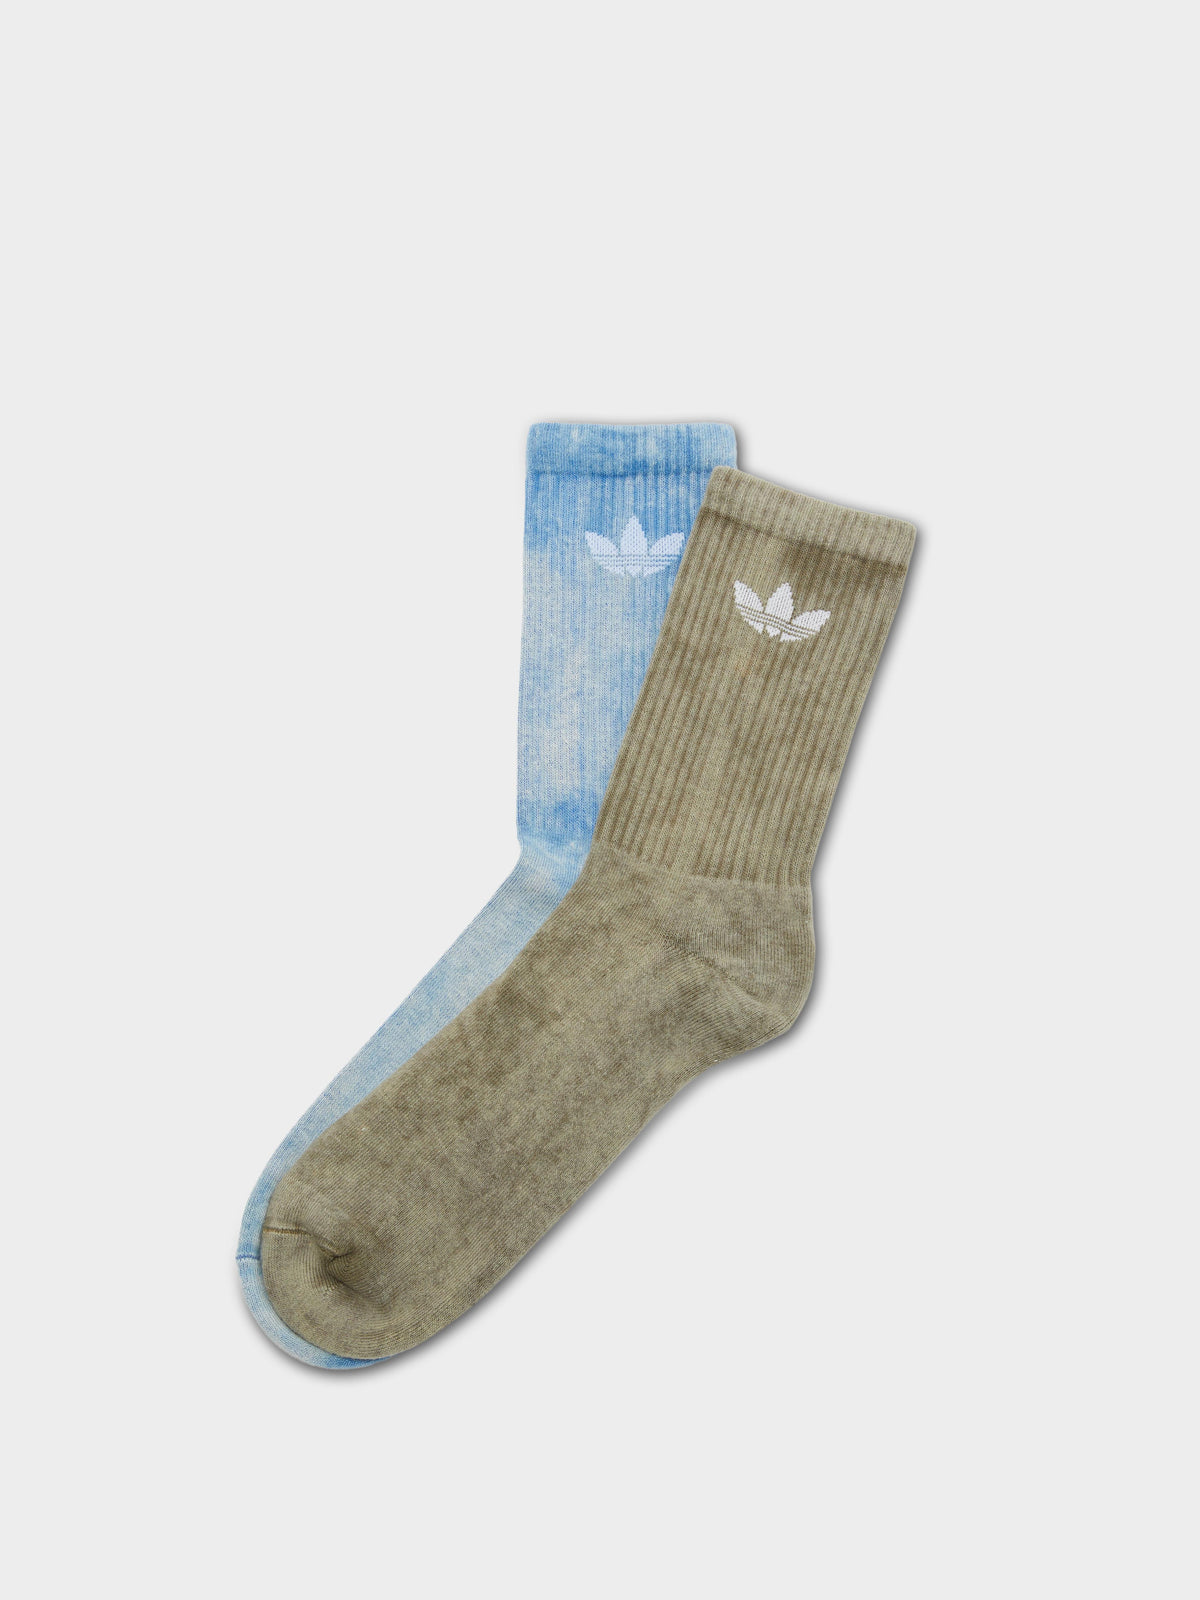 2 Pairs of Adventure Socks in Olive Strata &amp; Blue